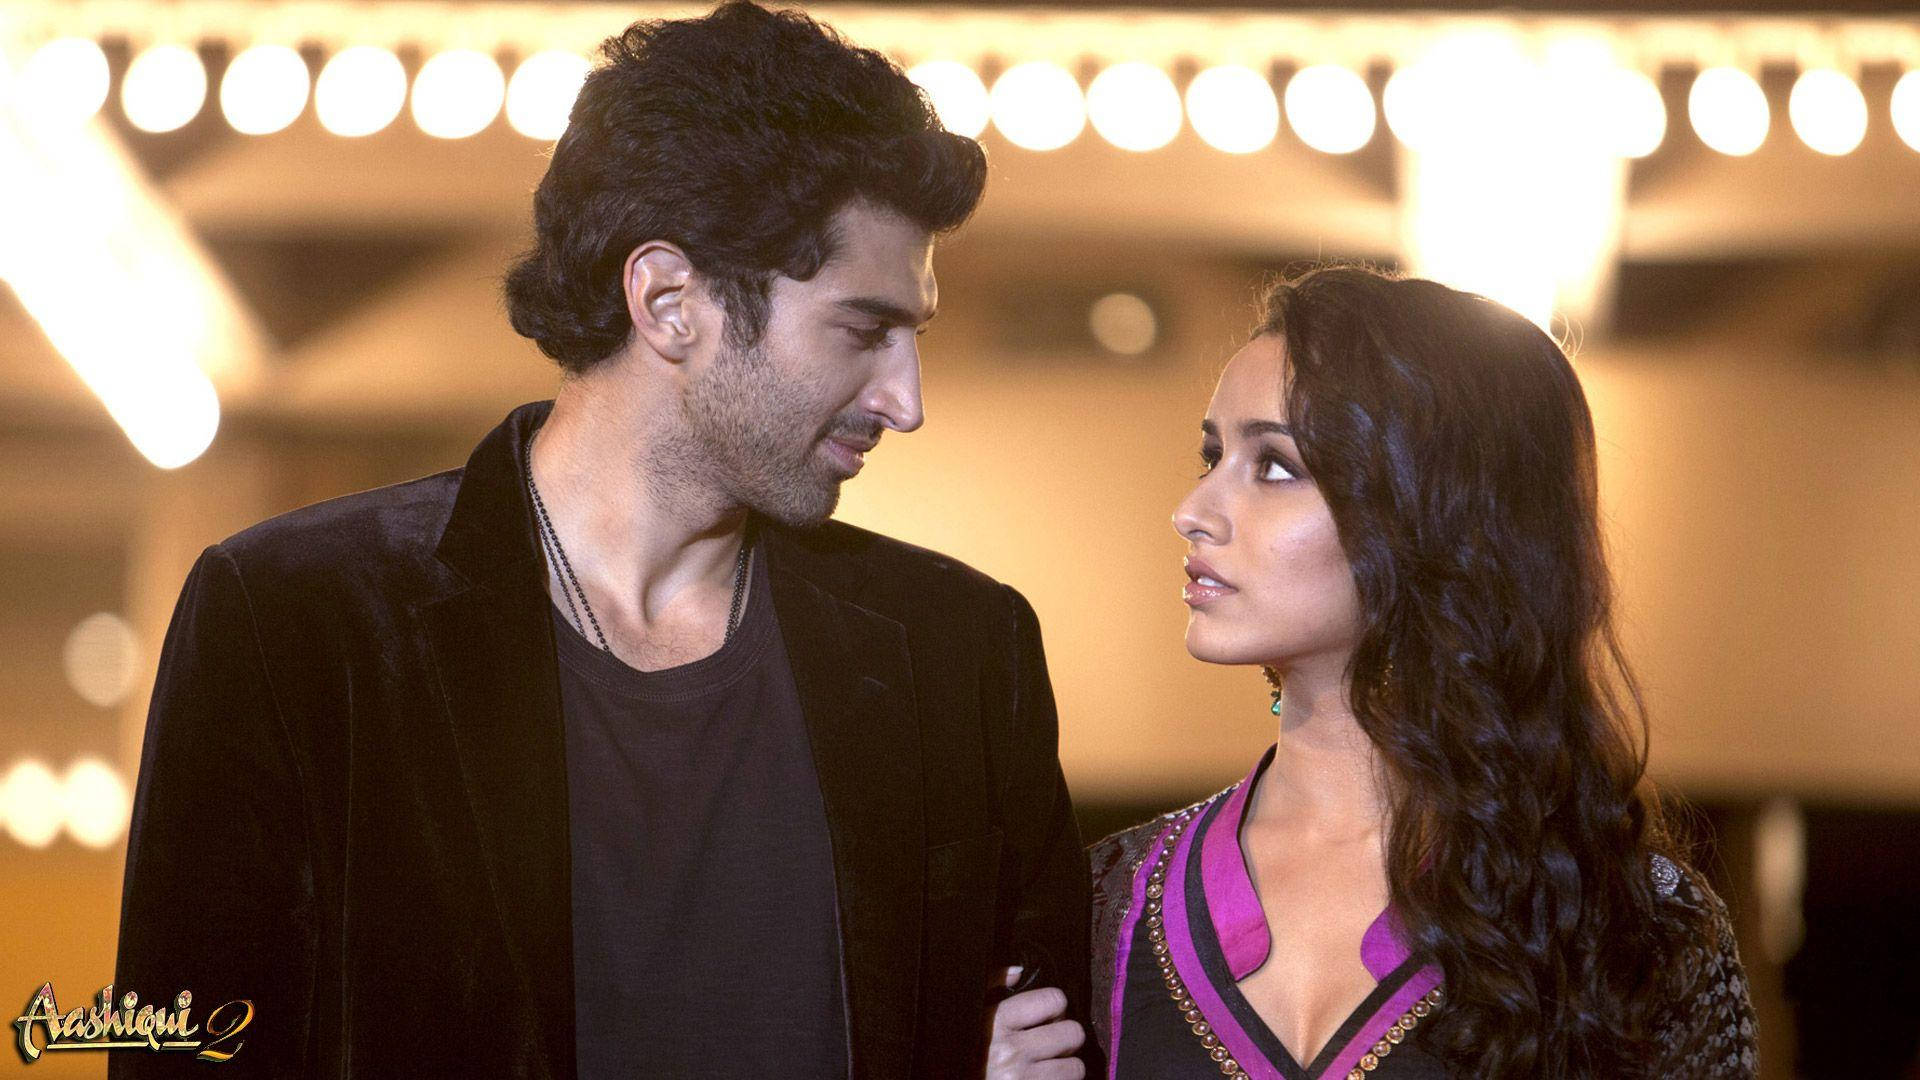 Aashiqui 2 Co-actors Formal Outfit Background